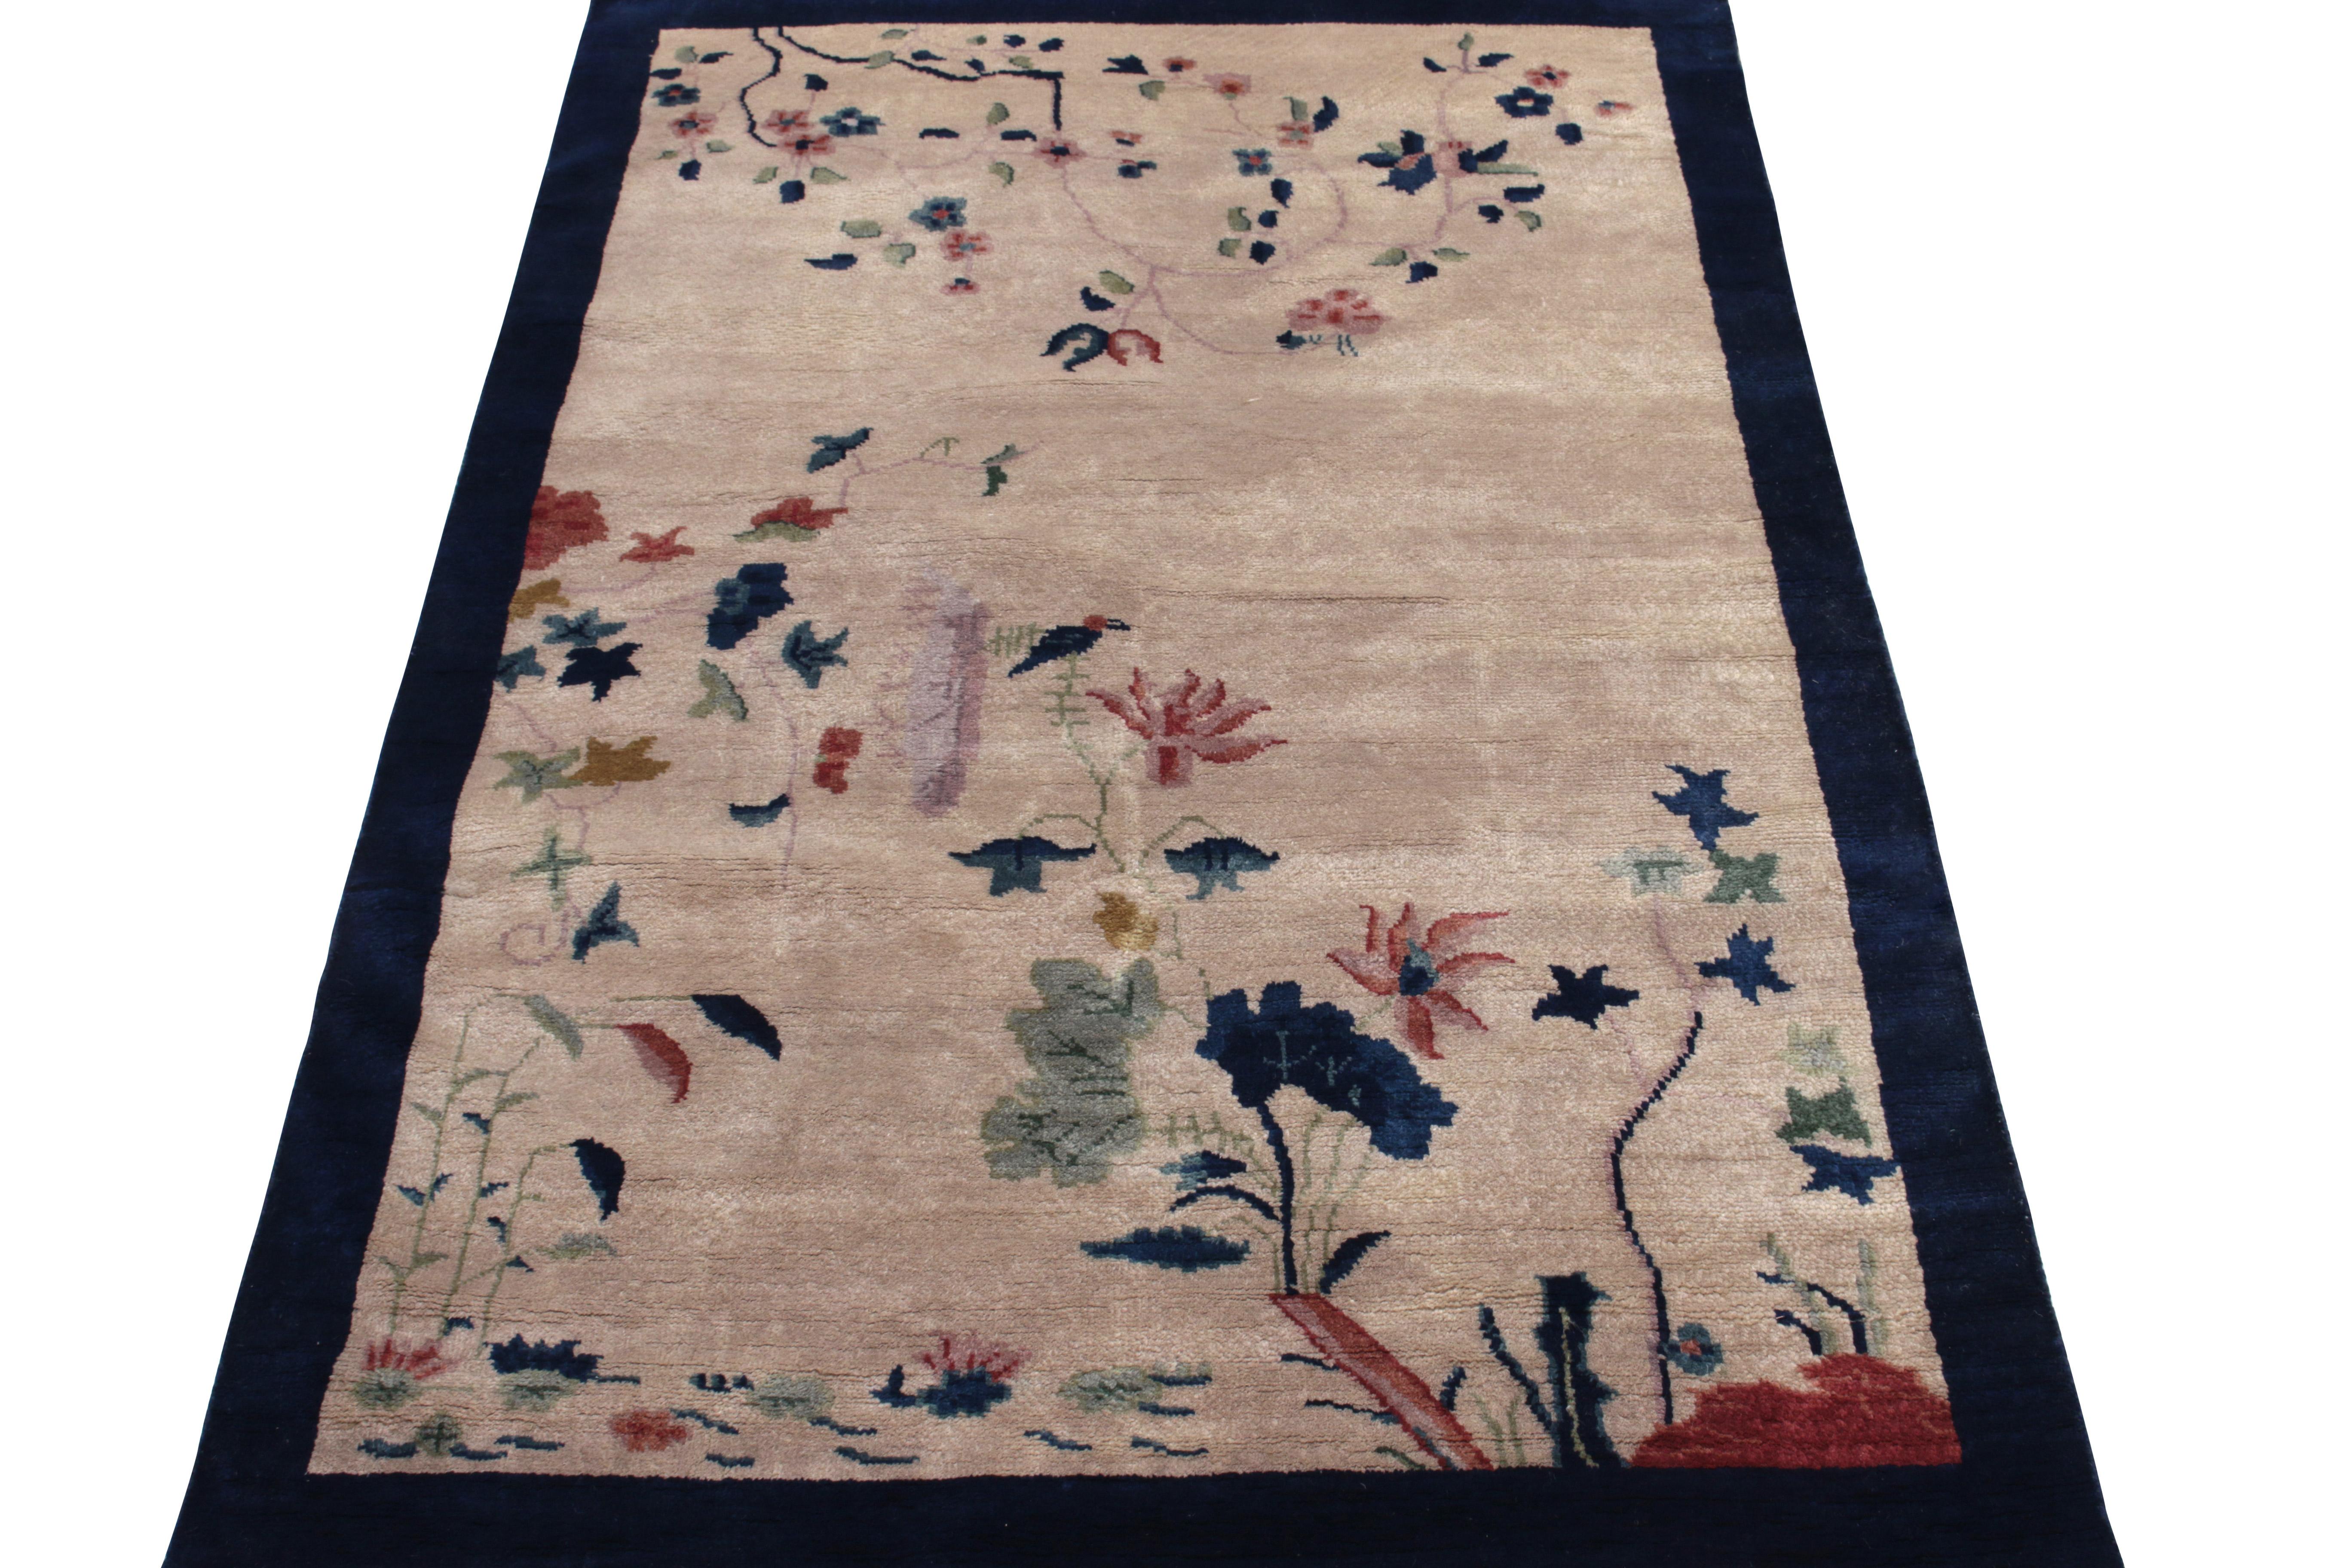 Celebrating a coveted Oriental style, Rug & Kilim presents this vintage 4x6 inspiration of Chinese Art Deco sensibilities joining its Antique & Vintage collection. The beauty of the rug lies in the harmony between bird imagery and resplendent floral